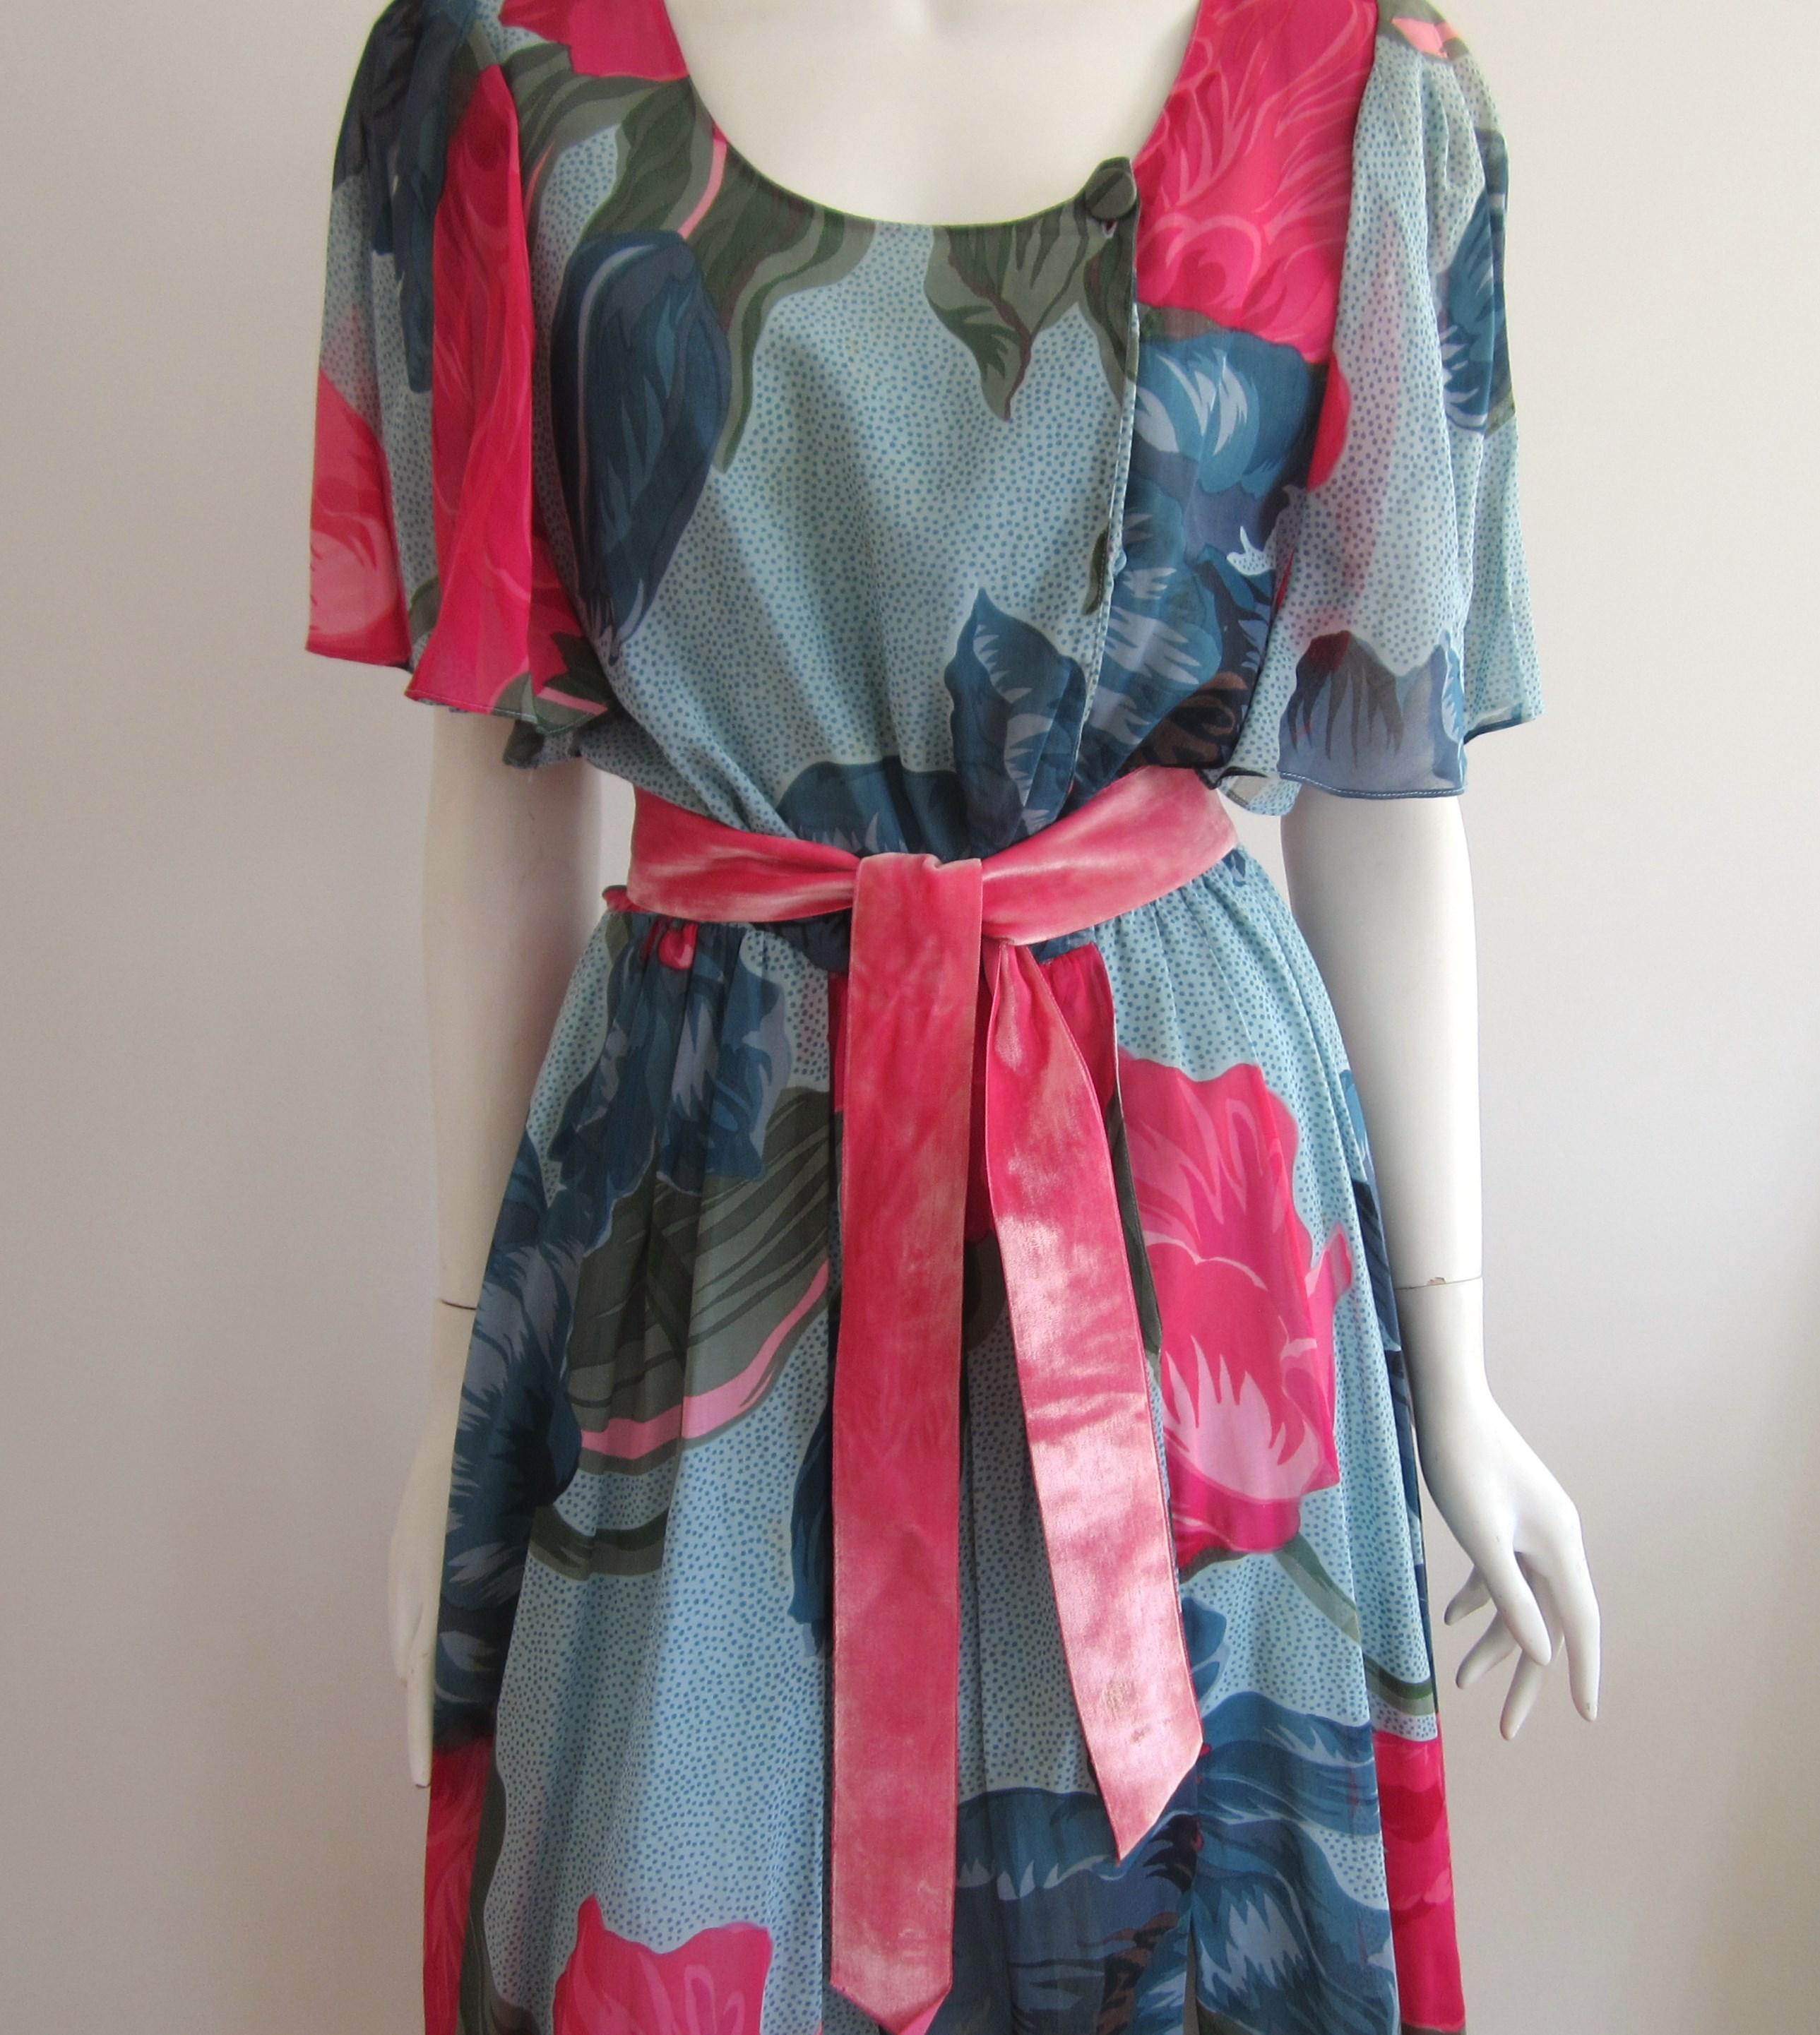 Vintage 1980s Hanae Mori Dress. Lovely flowing sleeves. Velvet belt. Clip, snaps and button closure with Pockets! Labeled a size 10- Measuring Up to 38 chest -- Up to 26 Waist -- Up to 40 Hips -- Length down the back 47in.  Please be sure to check